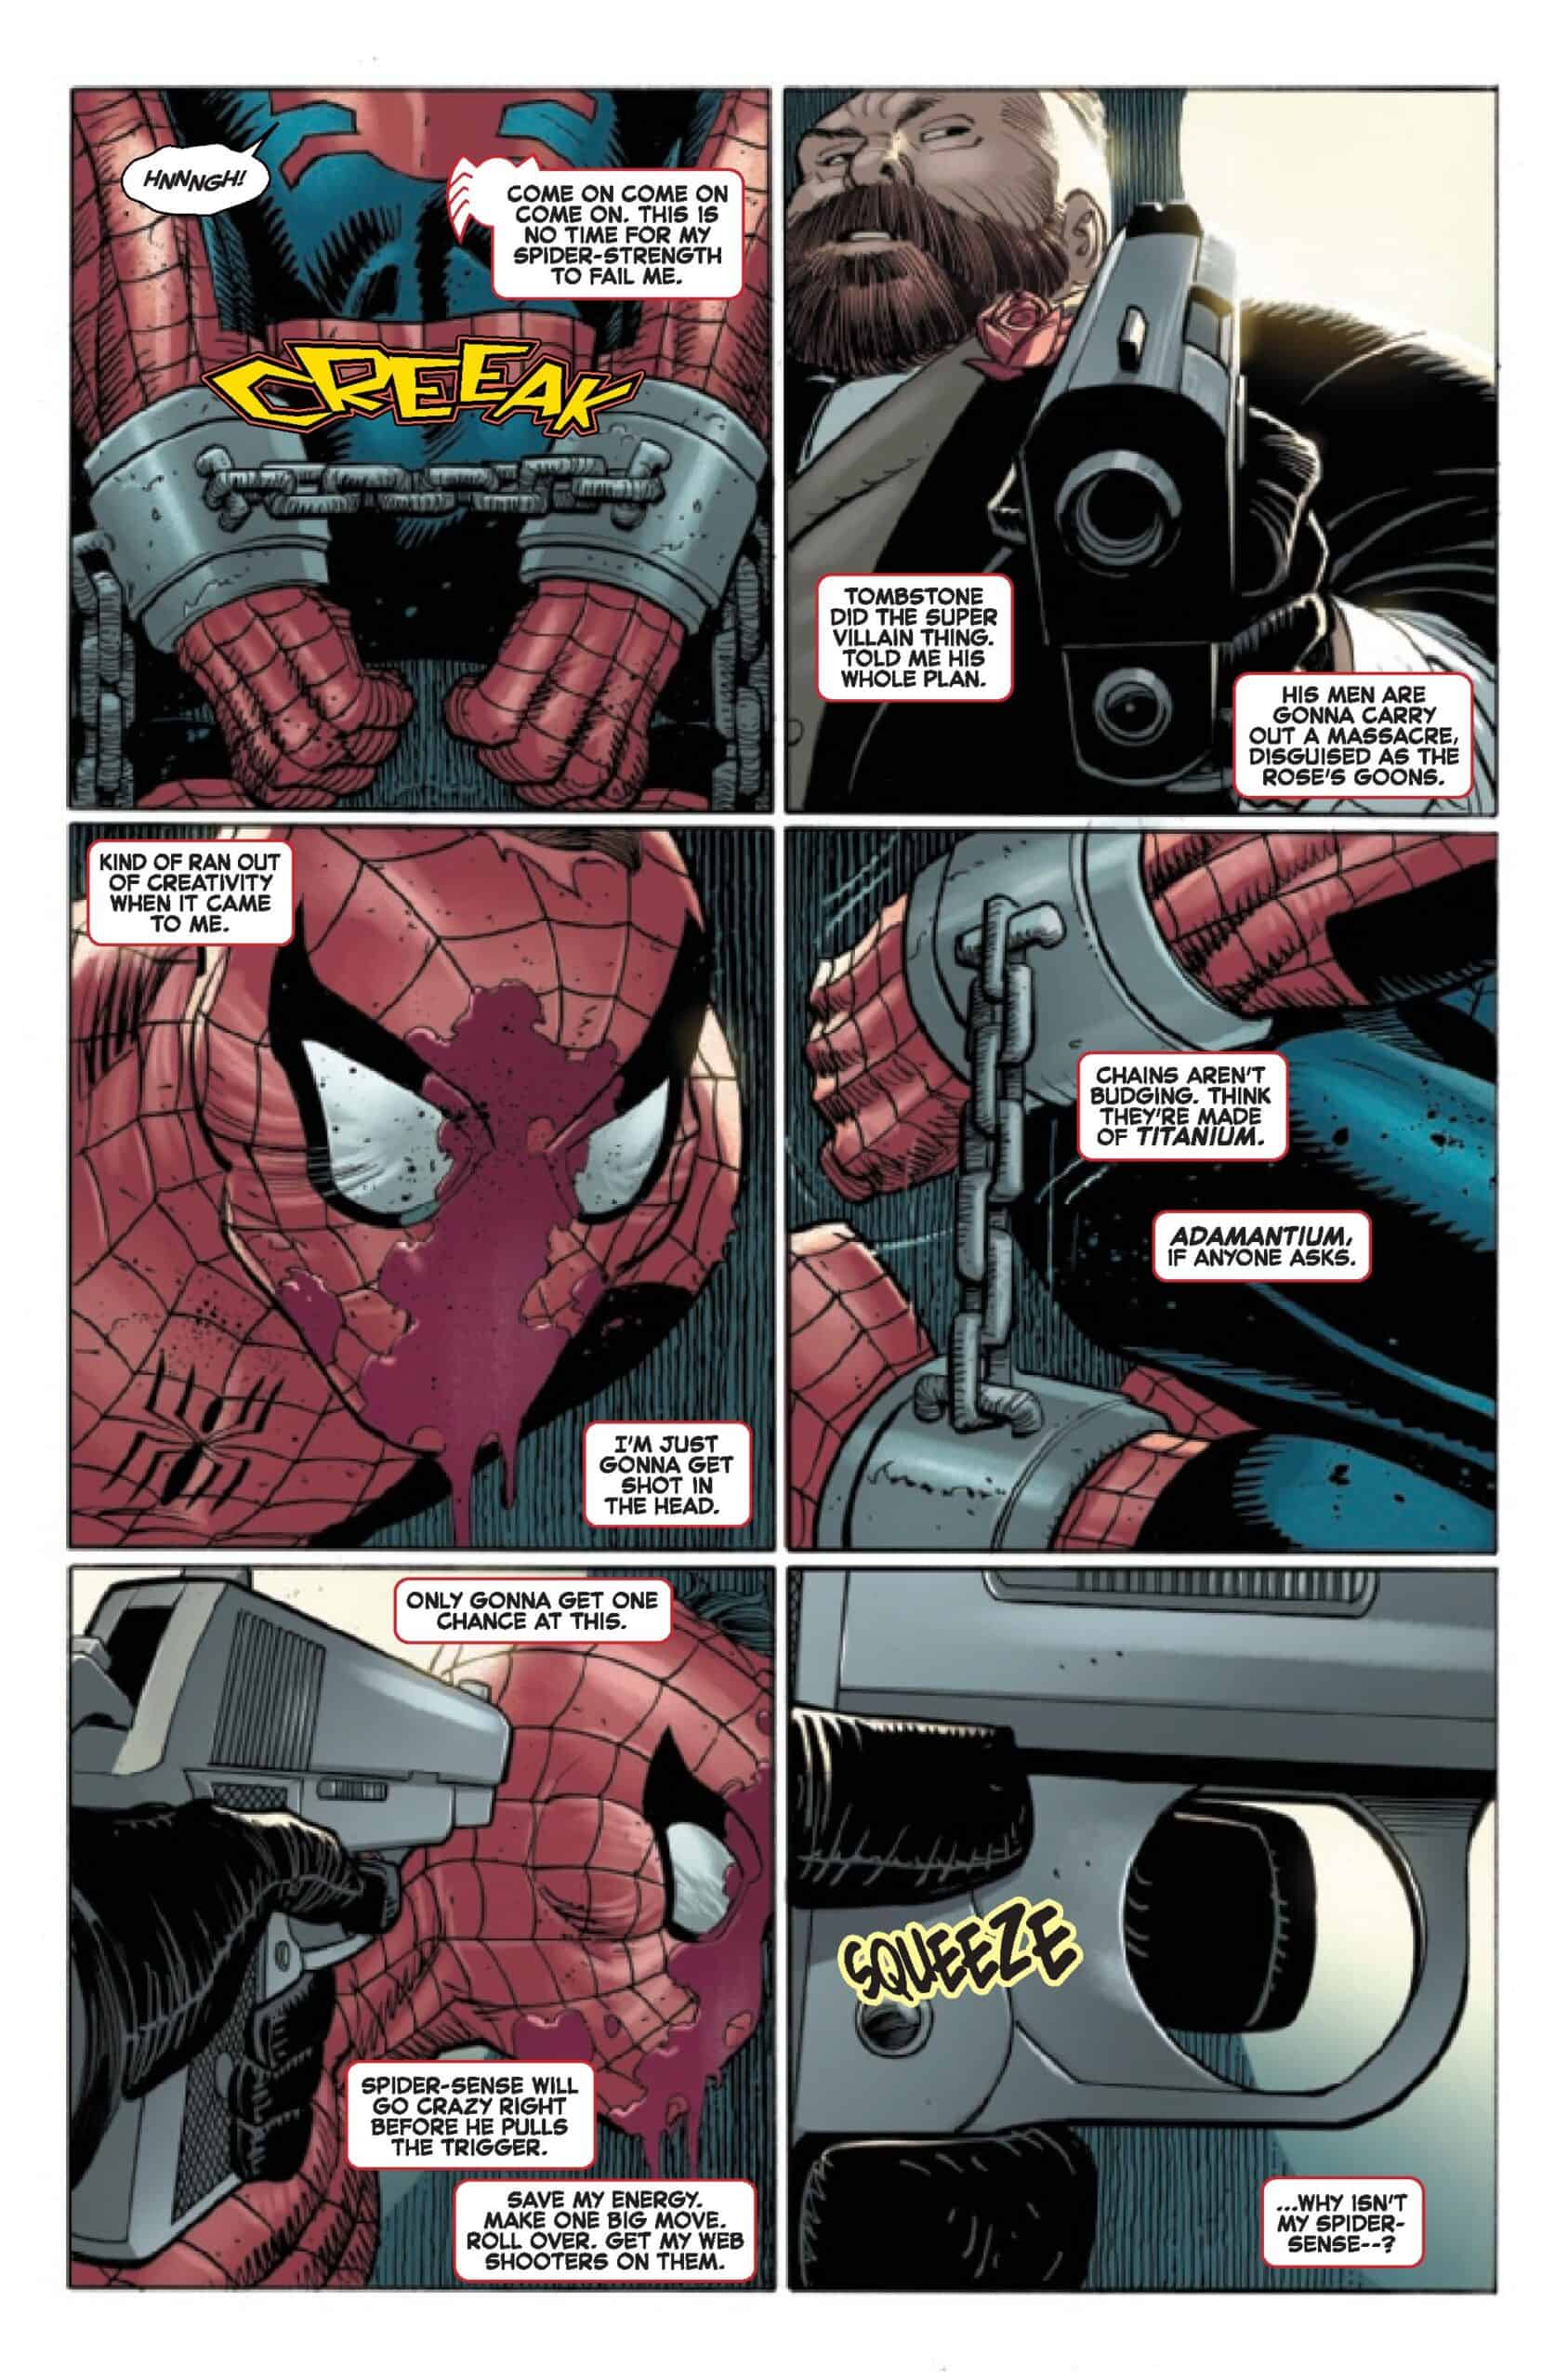 Superior Spider-Man' will return as an ongoing series – SMASH PAGES